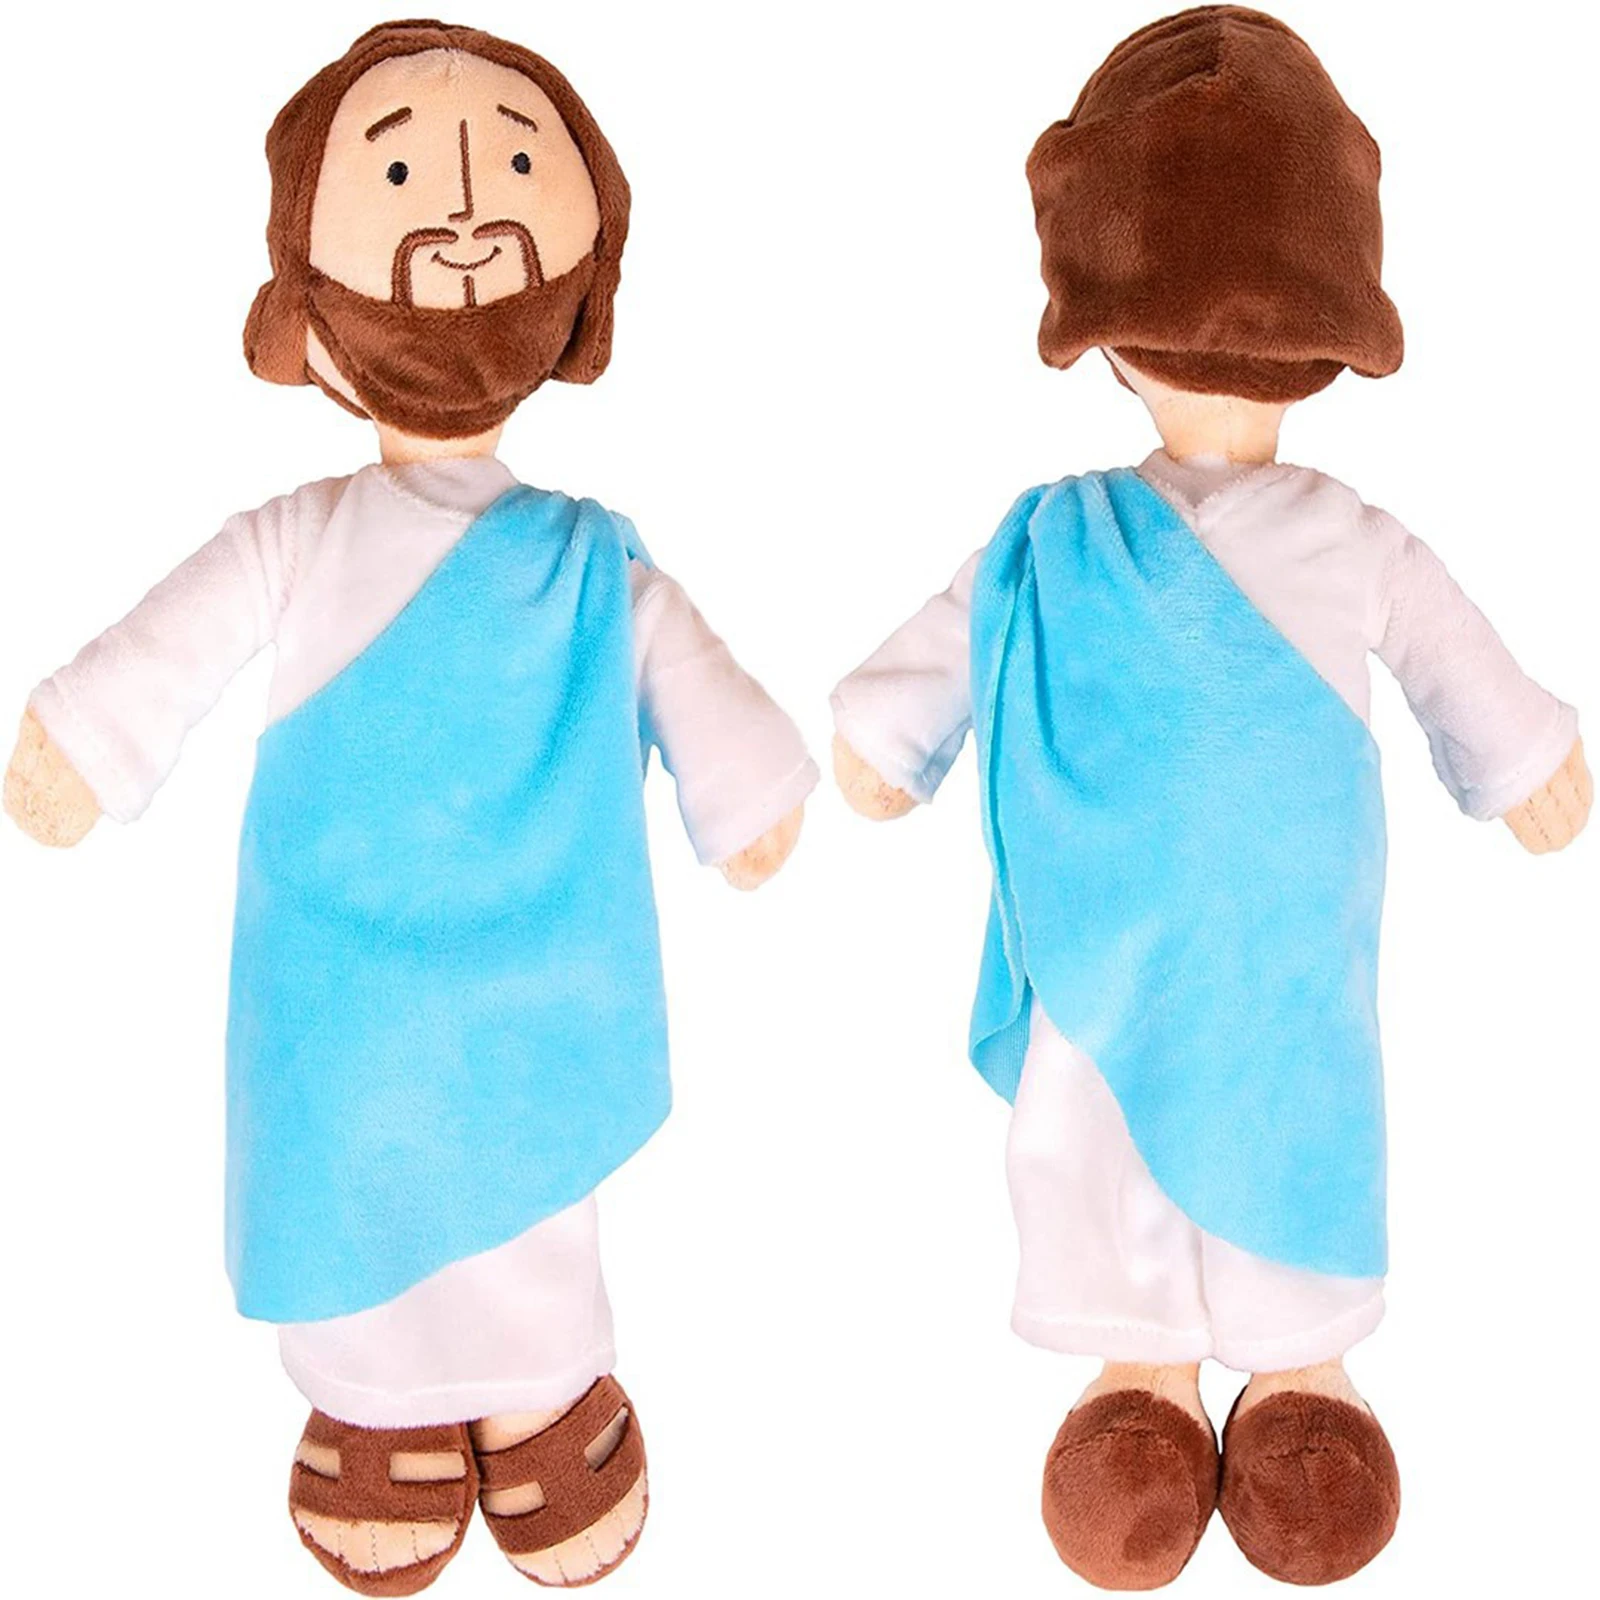 

Stuffed Doll for Kids Boys Girls 13" Classic Jesus Plush Christ Religious Toy Savior with Smile Religious Party Favors Hot